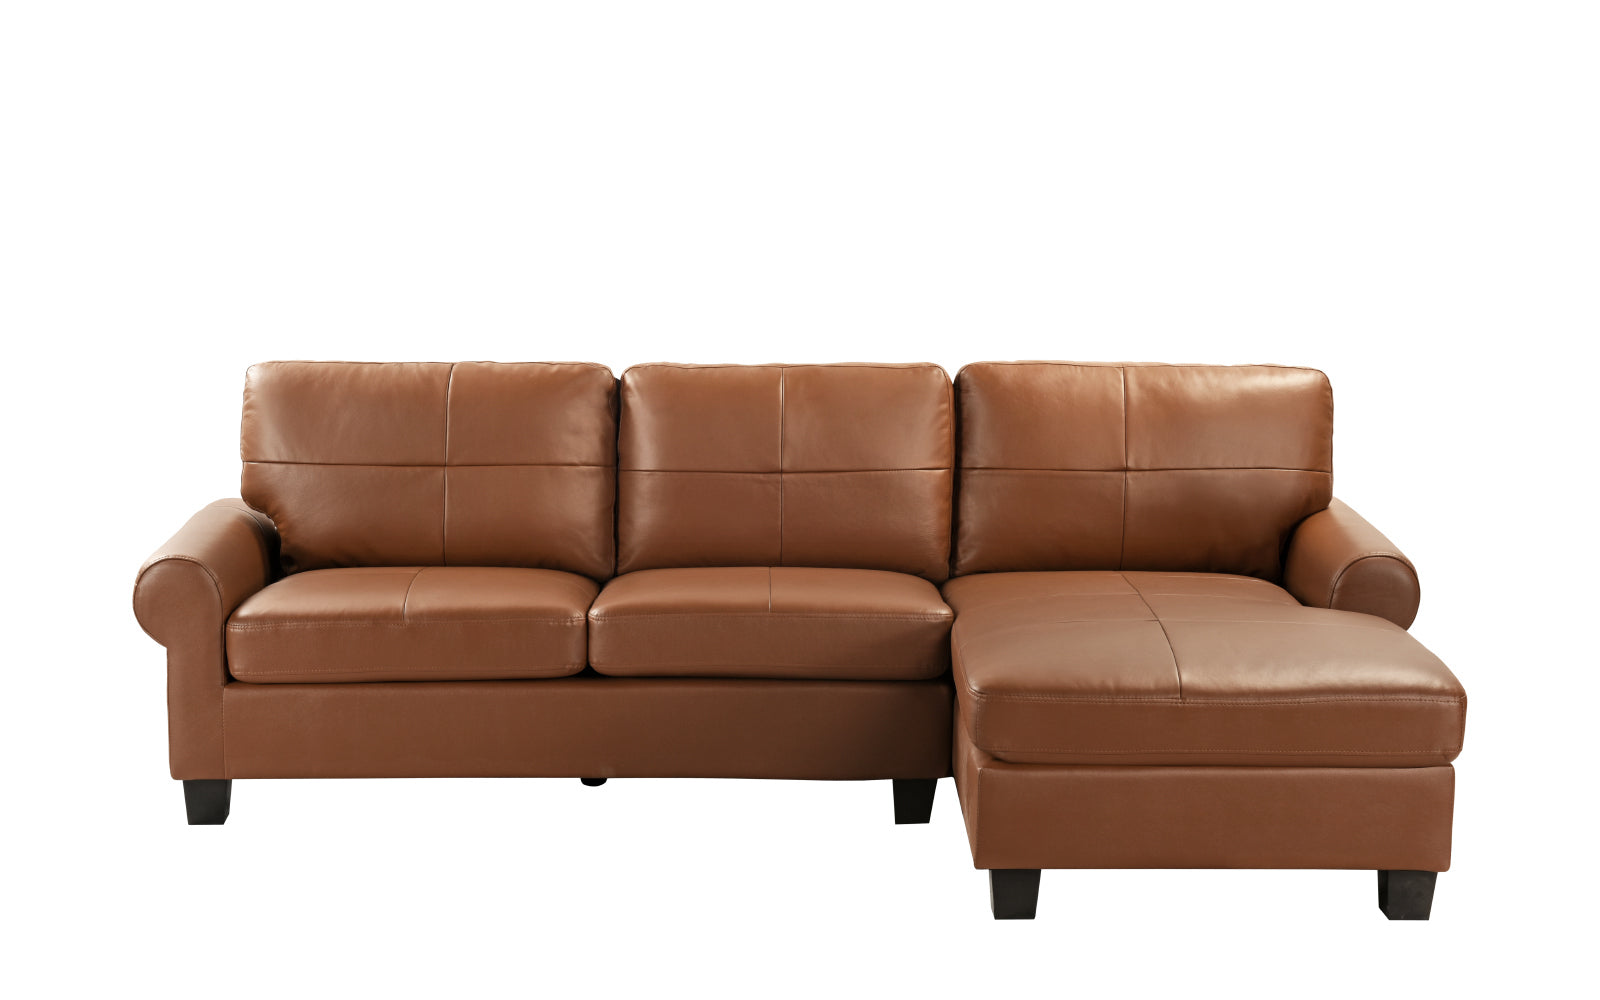 Dallas Leather Match Sectional Sofa with Right Facing Chaise